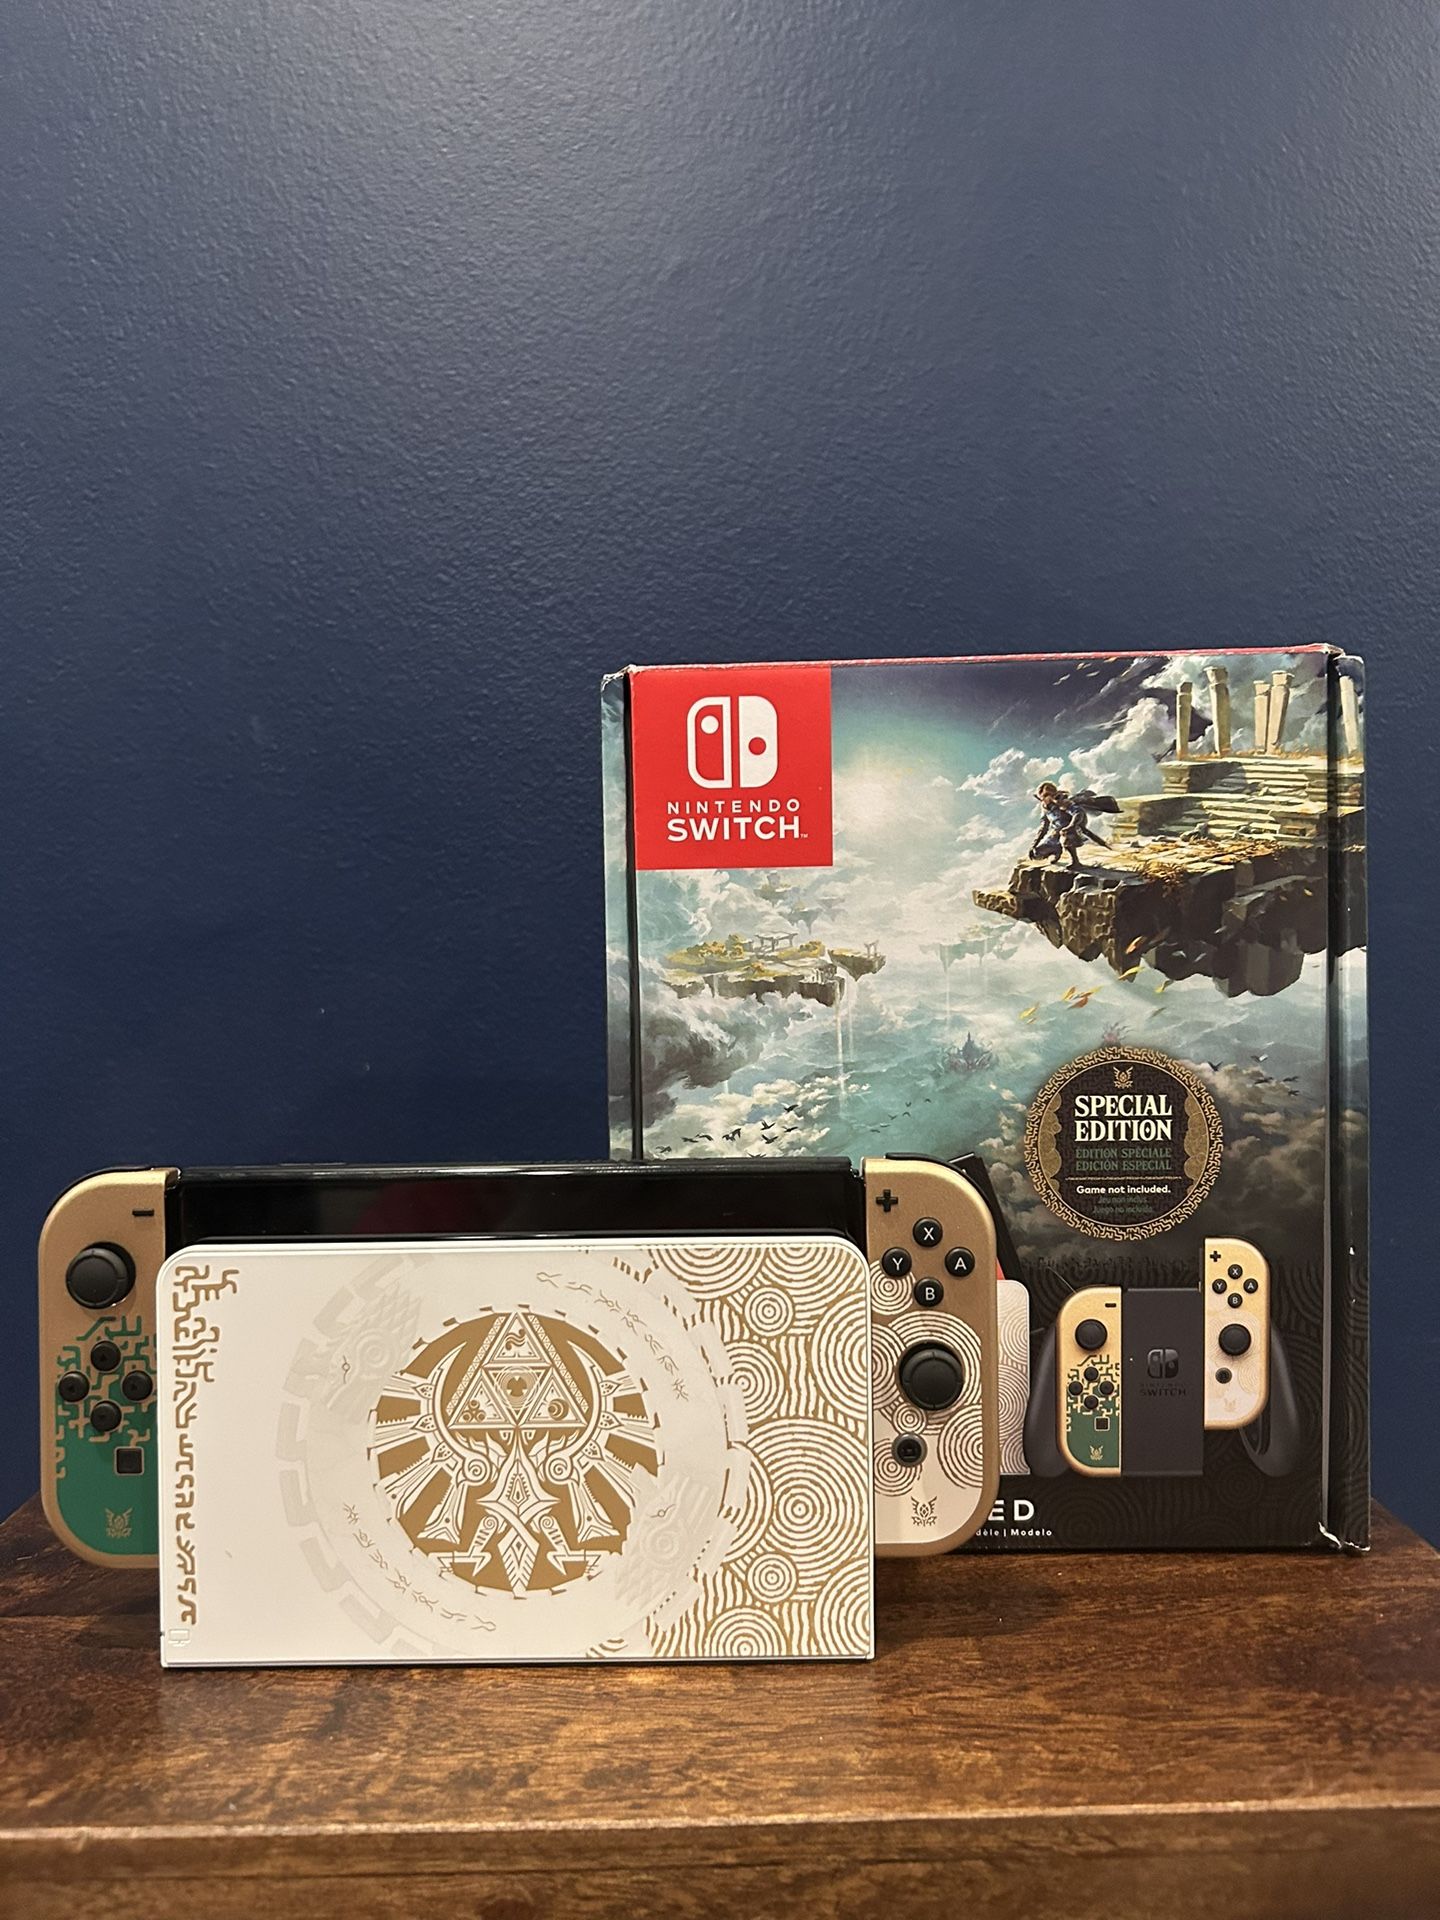 FOR TRADE ONLY Nintendo Switch oled Zelda Edition 